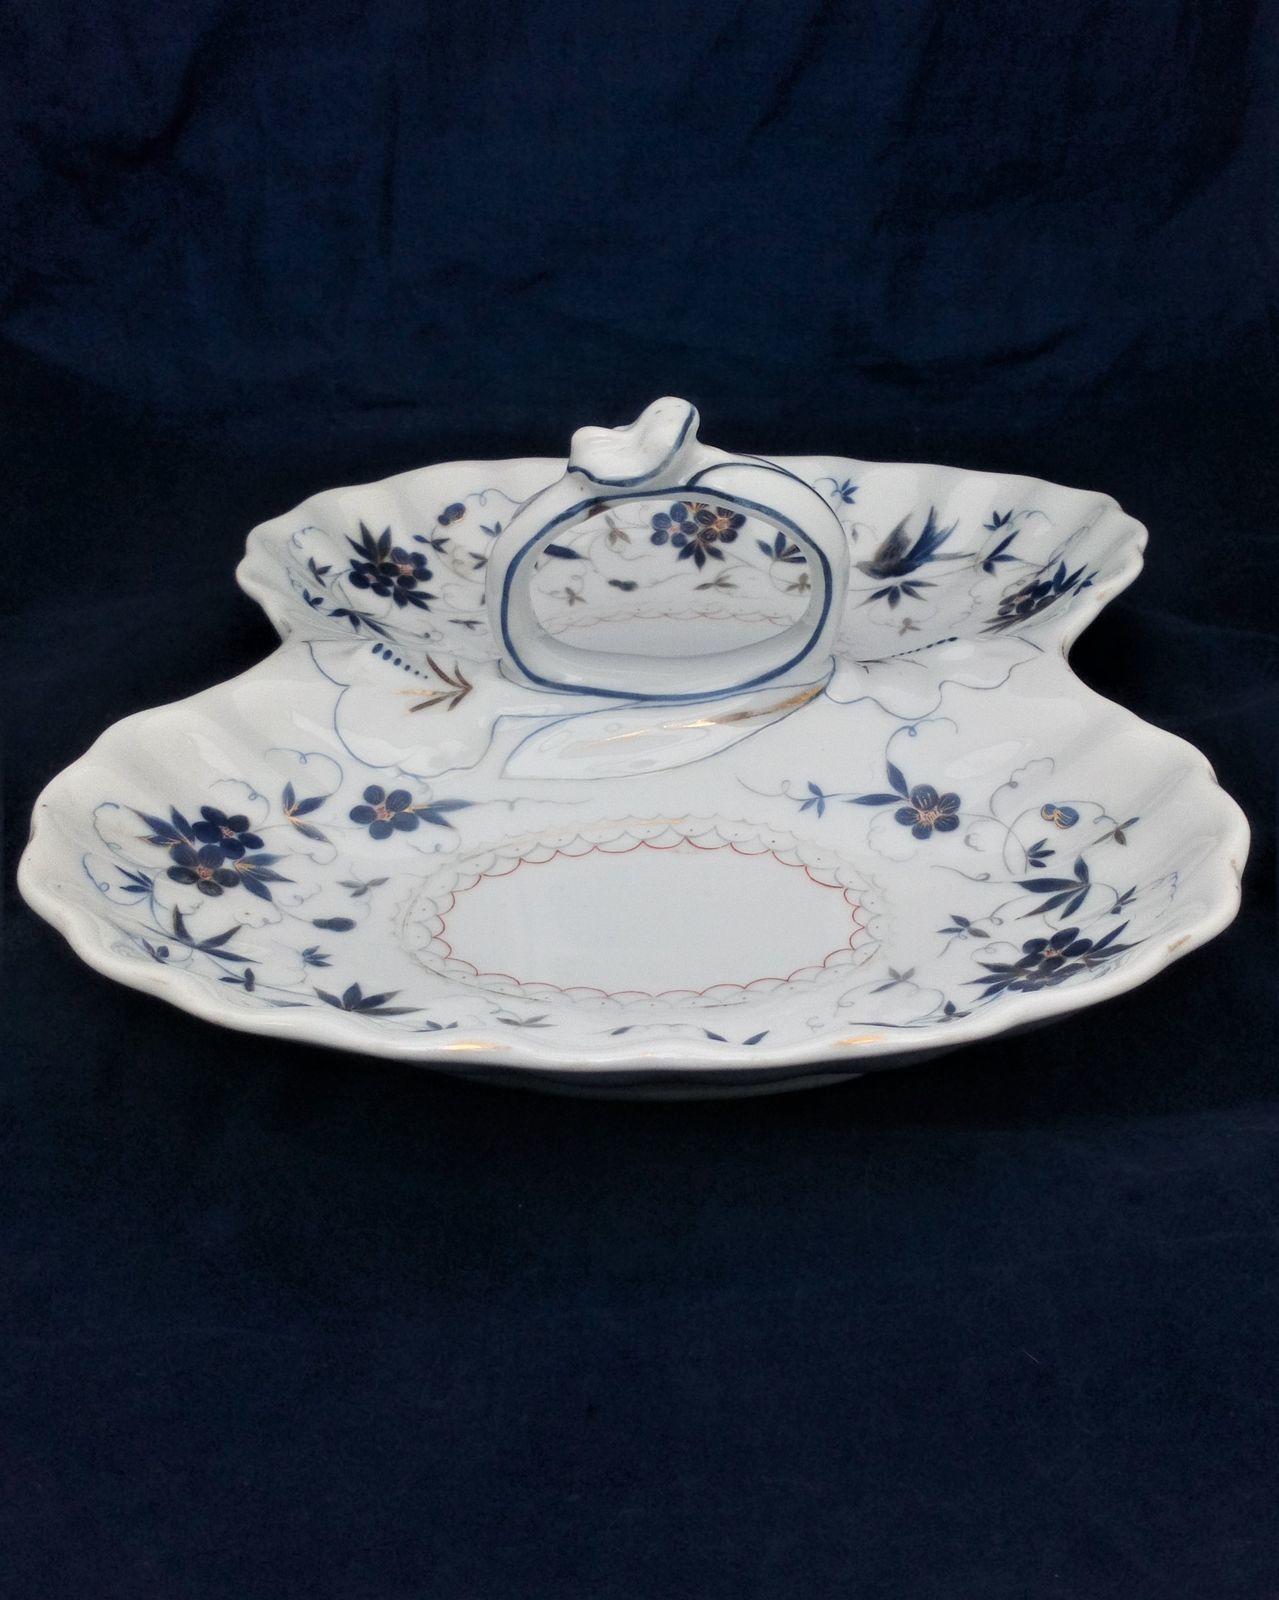 Antique German porcelain hors d'ouevres dish with loop handle decorted with blue flowrs and birds with gided highlights. Marked on the base KPM for Krister Porzellan-Manufaktur of Waldenburg circa 1860.